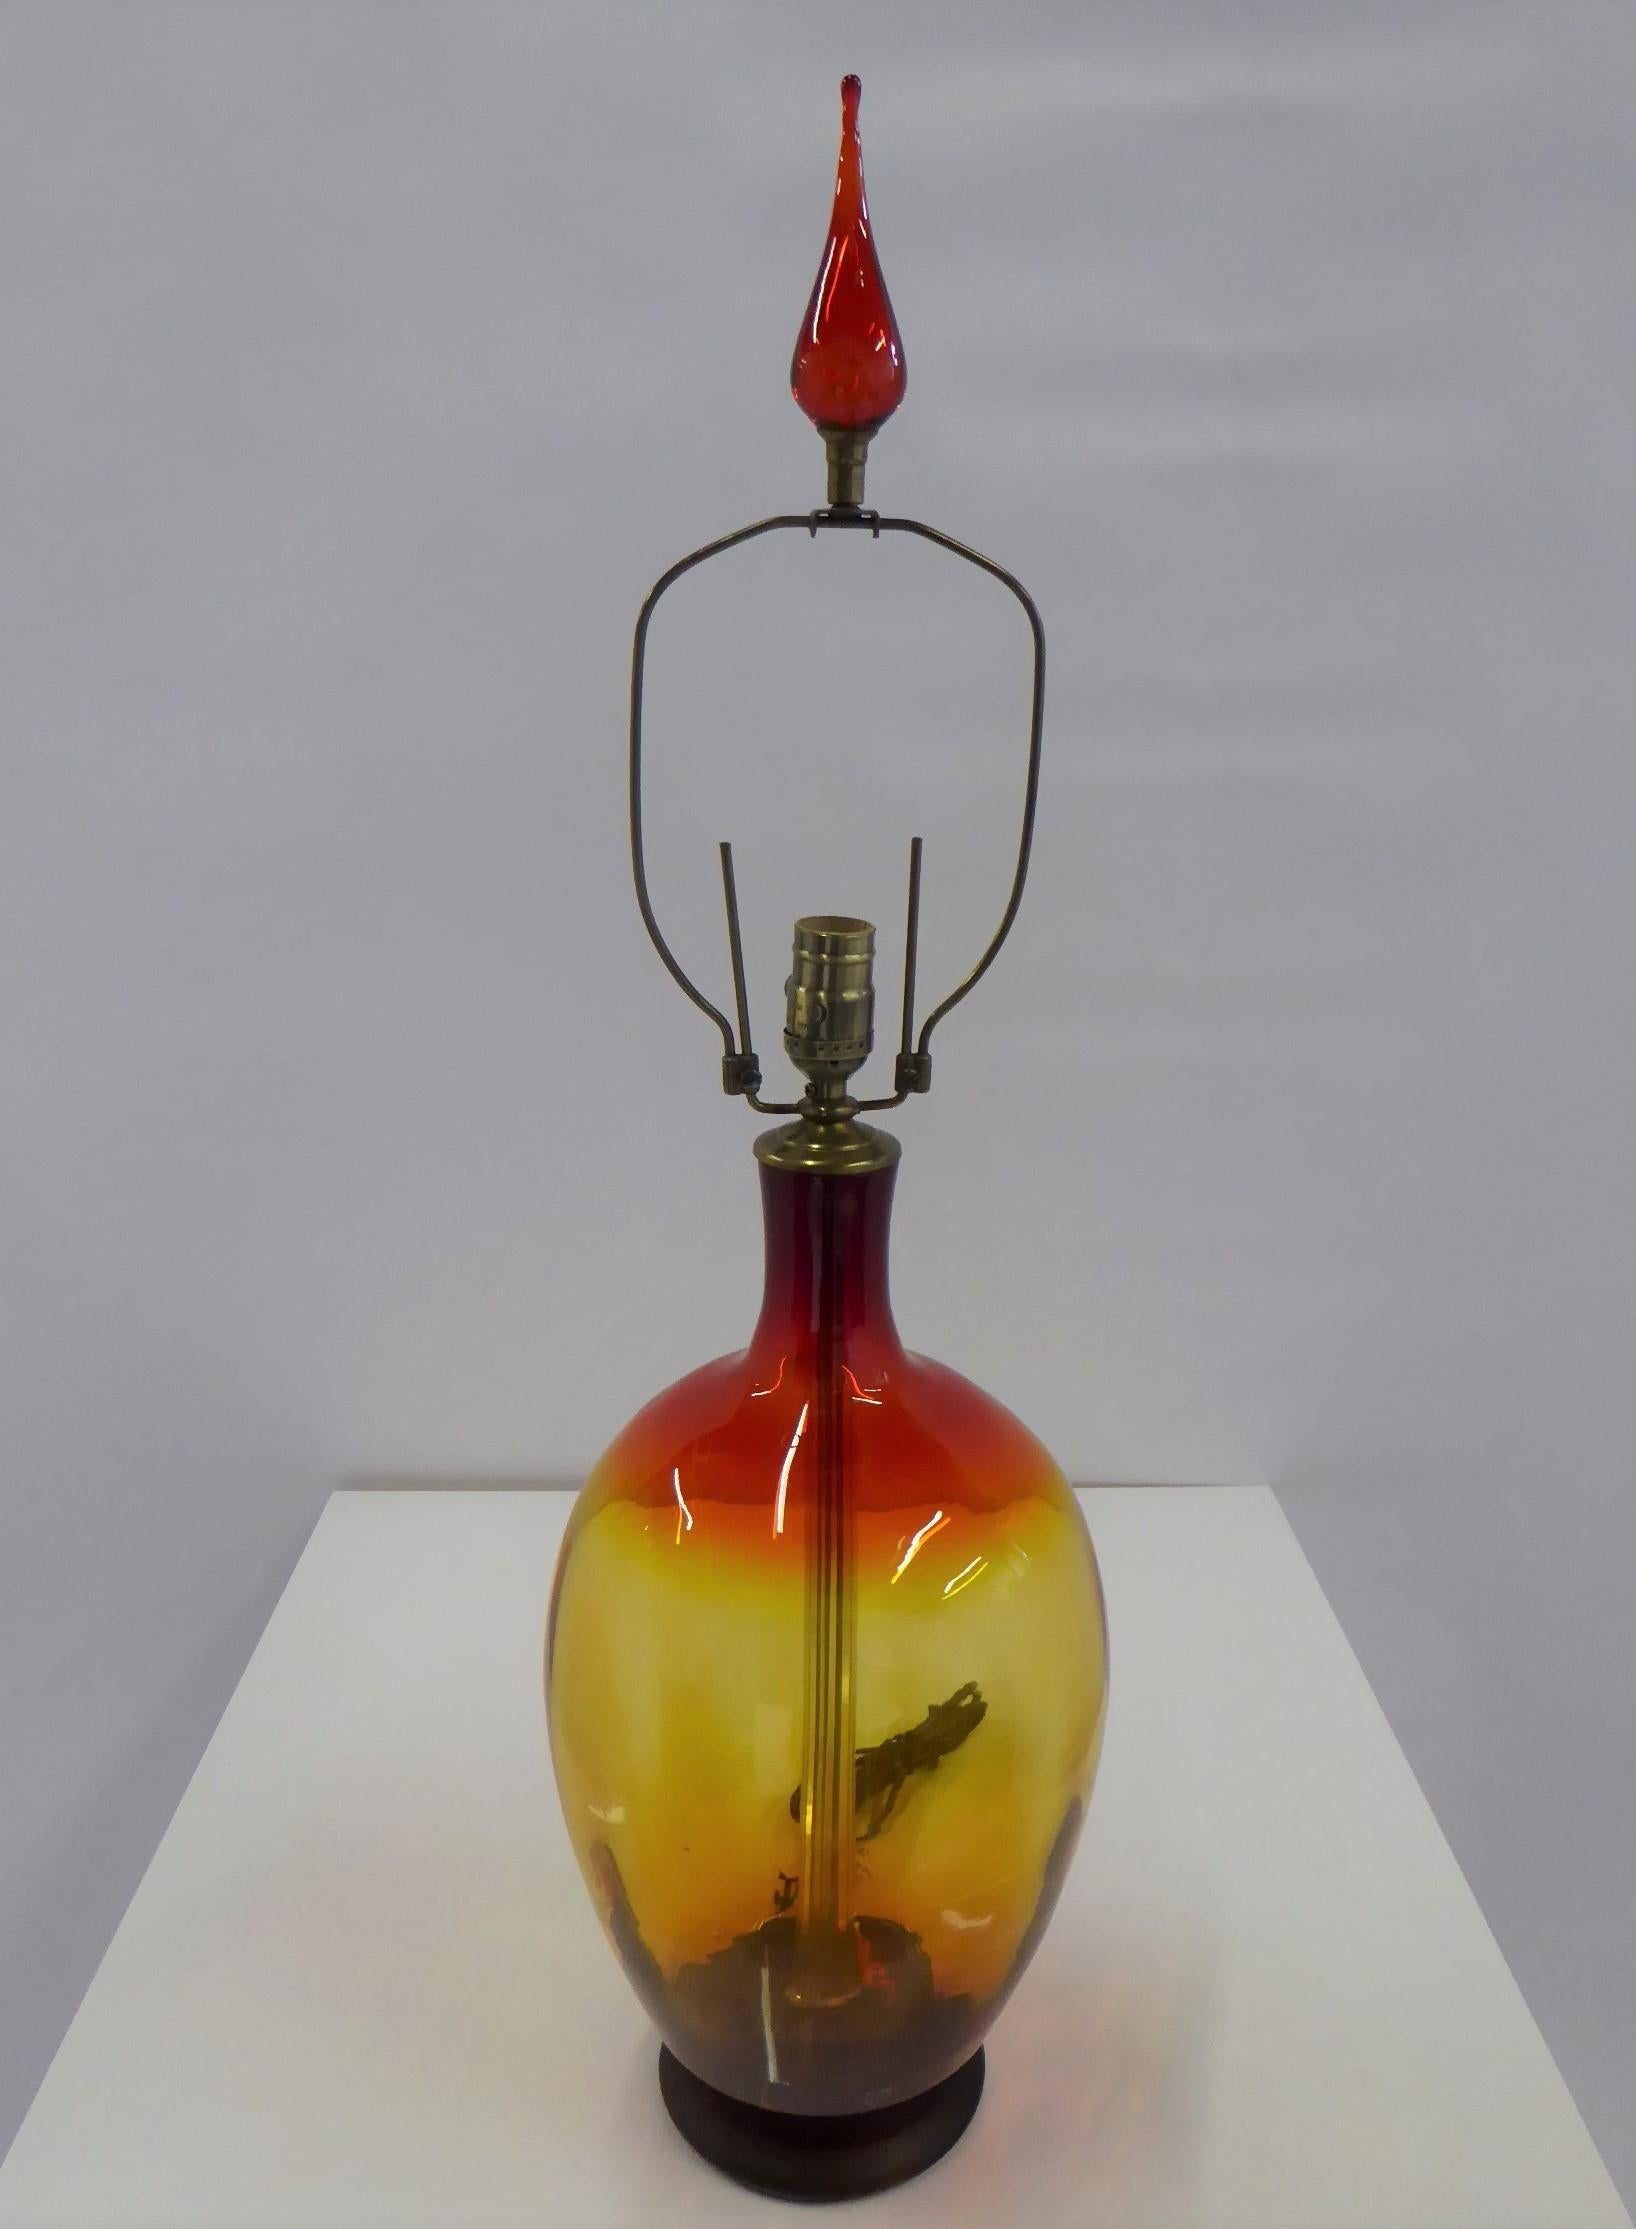 REDUCED FROM $1200....Mid-Century Modern Amberina colored glass table lamp designed by Wayne Husted in 1962 for Blenko Glass Company of West Virginia. In a dramatic large bulbous shape and in a color, called Tangerine by Blenko, which is red melding